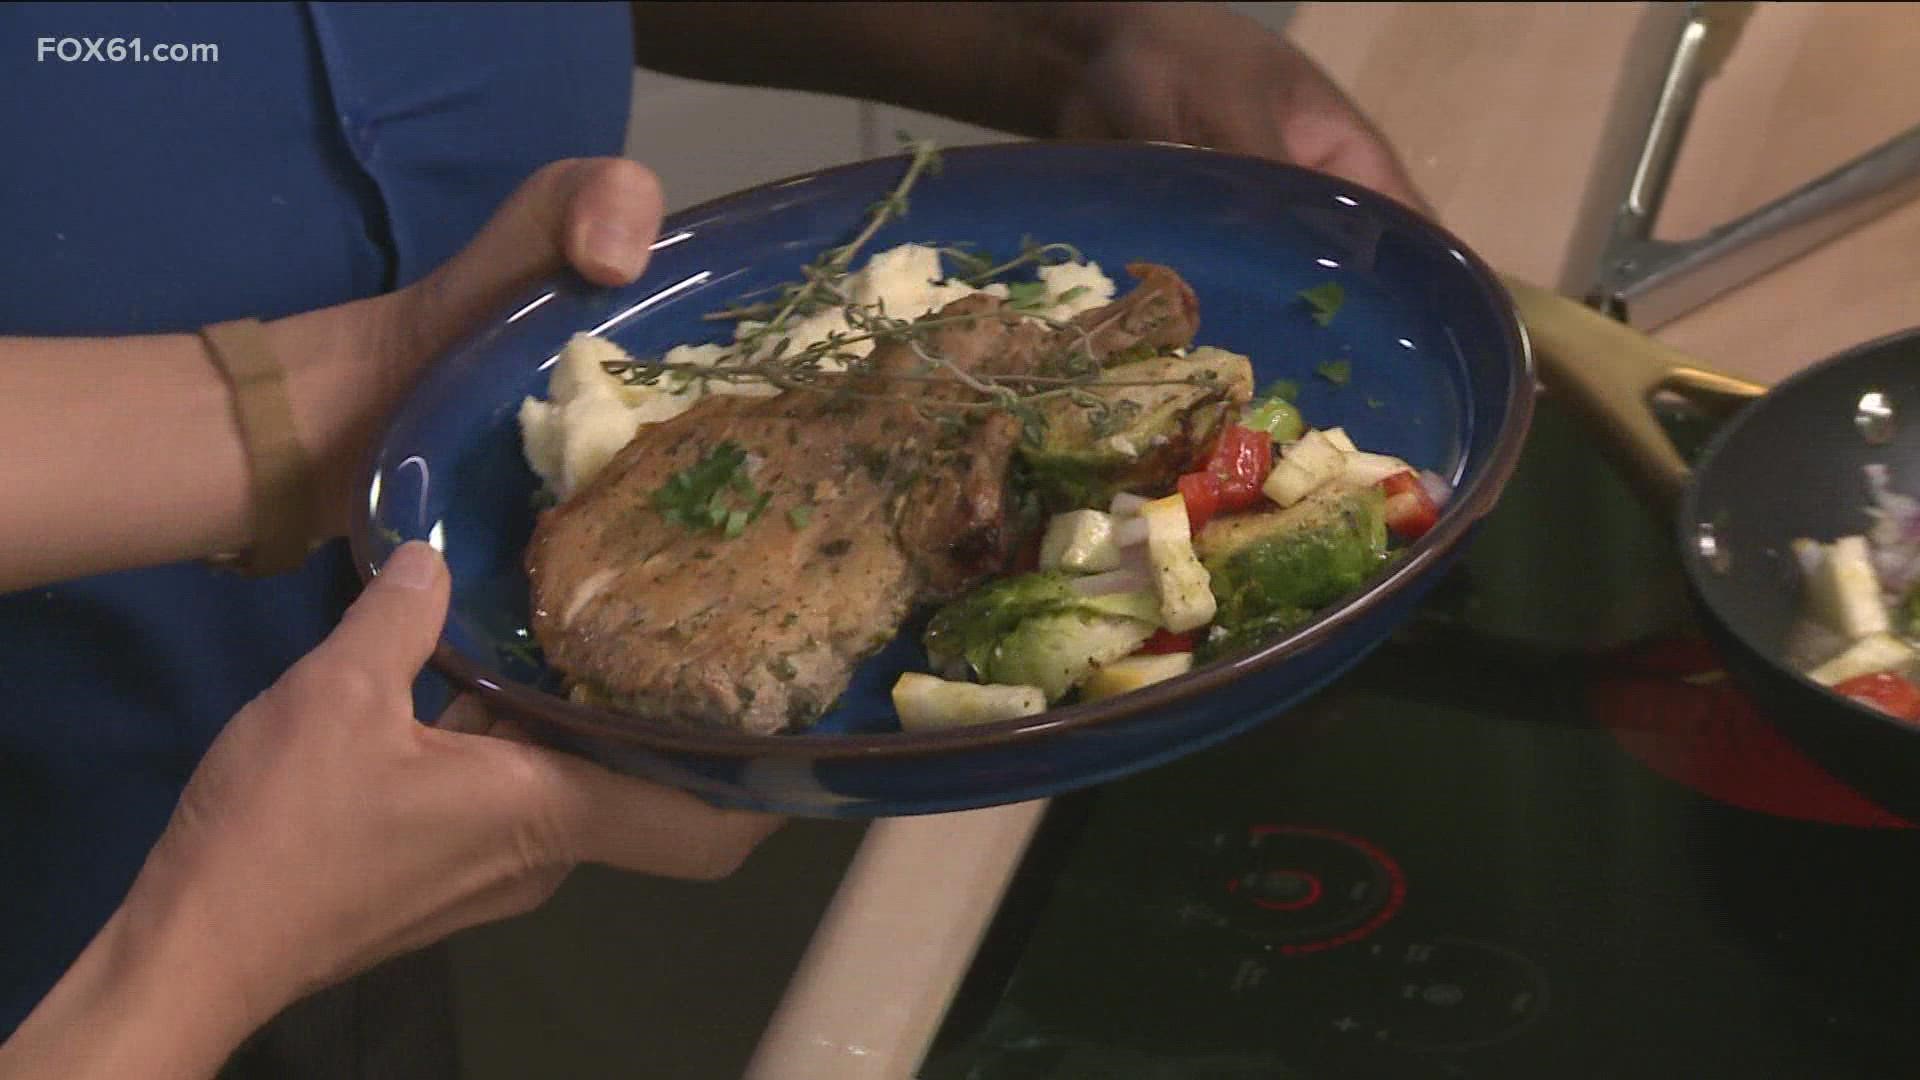 Learn how to make lemon rosemary roasted pork chops along with a sauted veggie medley from West Hartford's Blue Plate Kitchen!